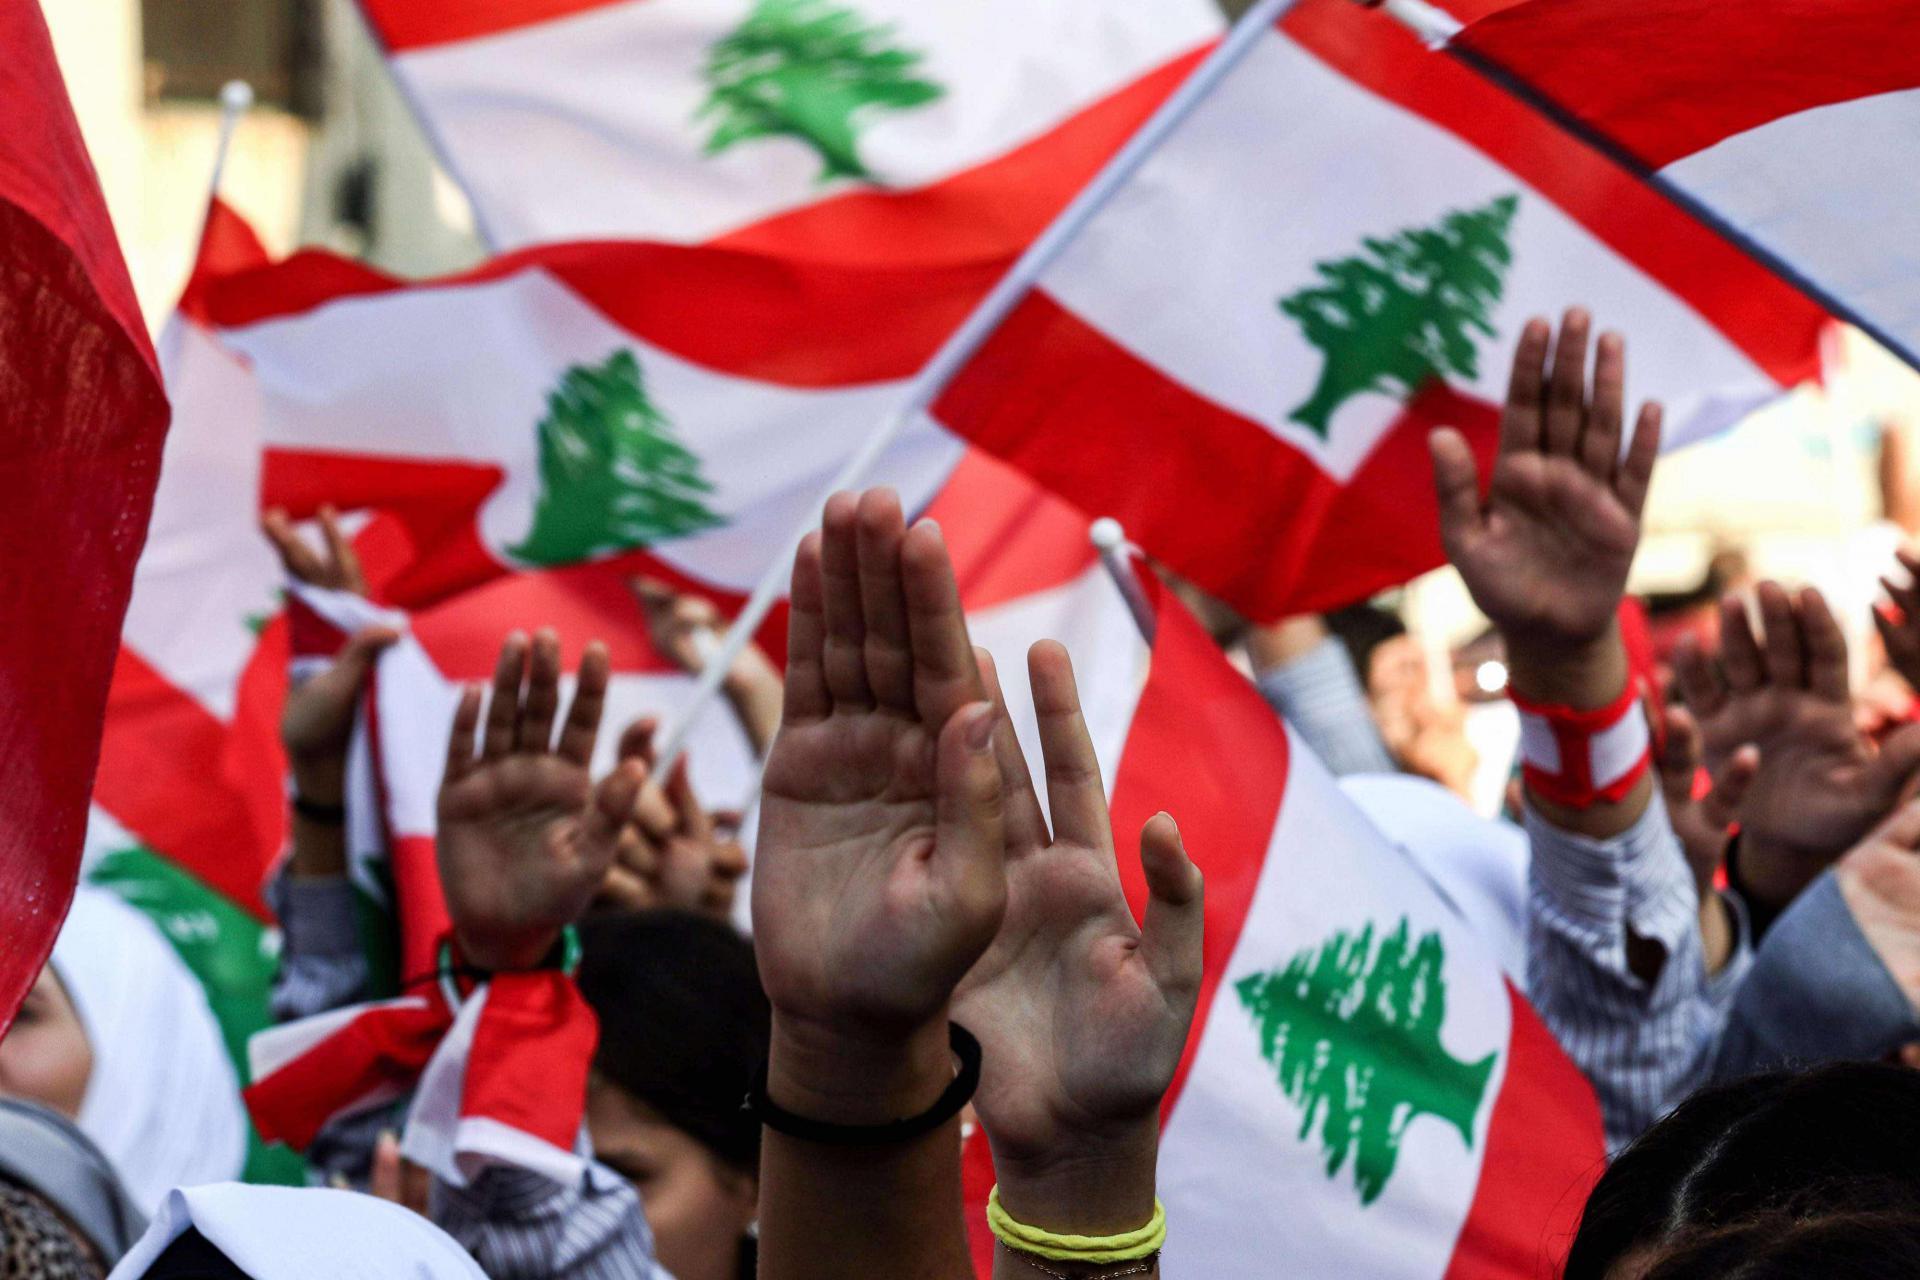 The political turmoil comes as Lebanon grapples with the worst economic and financial strains since the 1975-90 civil war